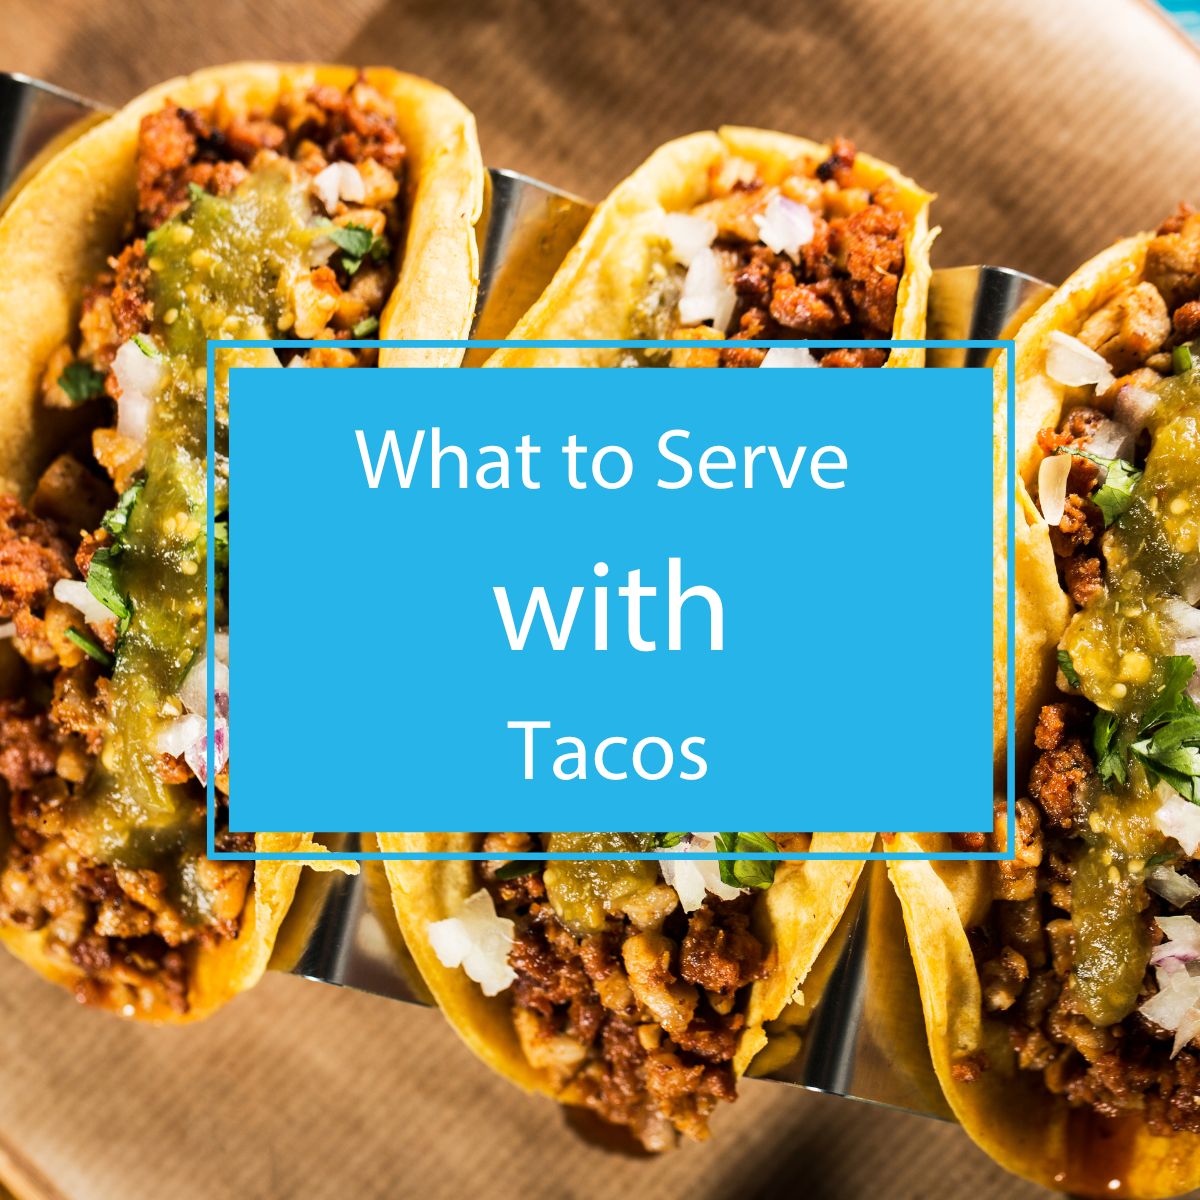 What to Serve with Tacos